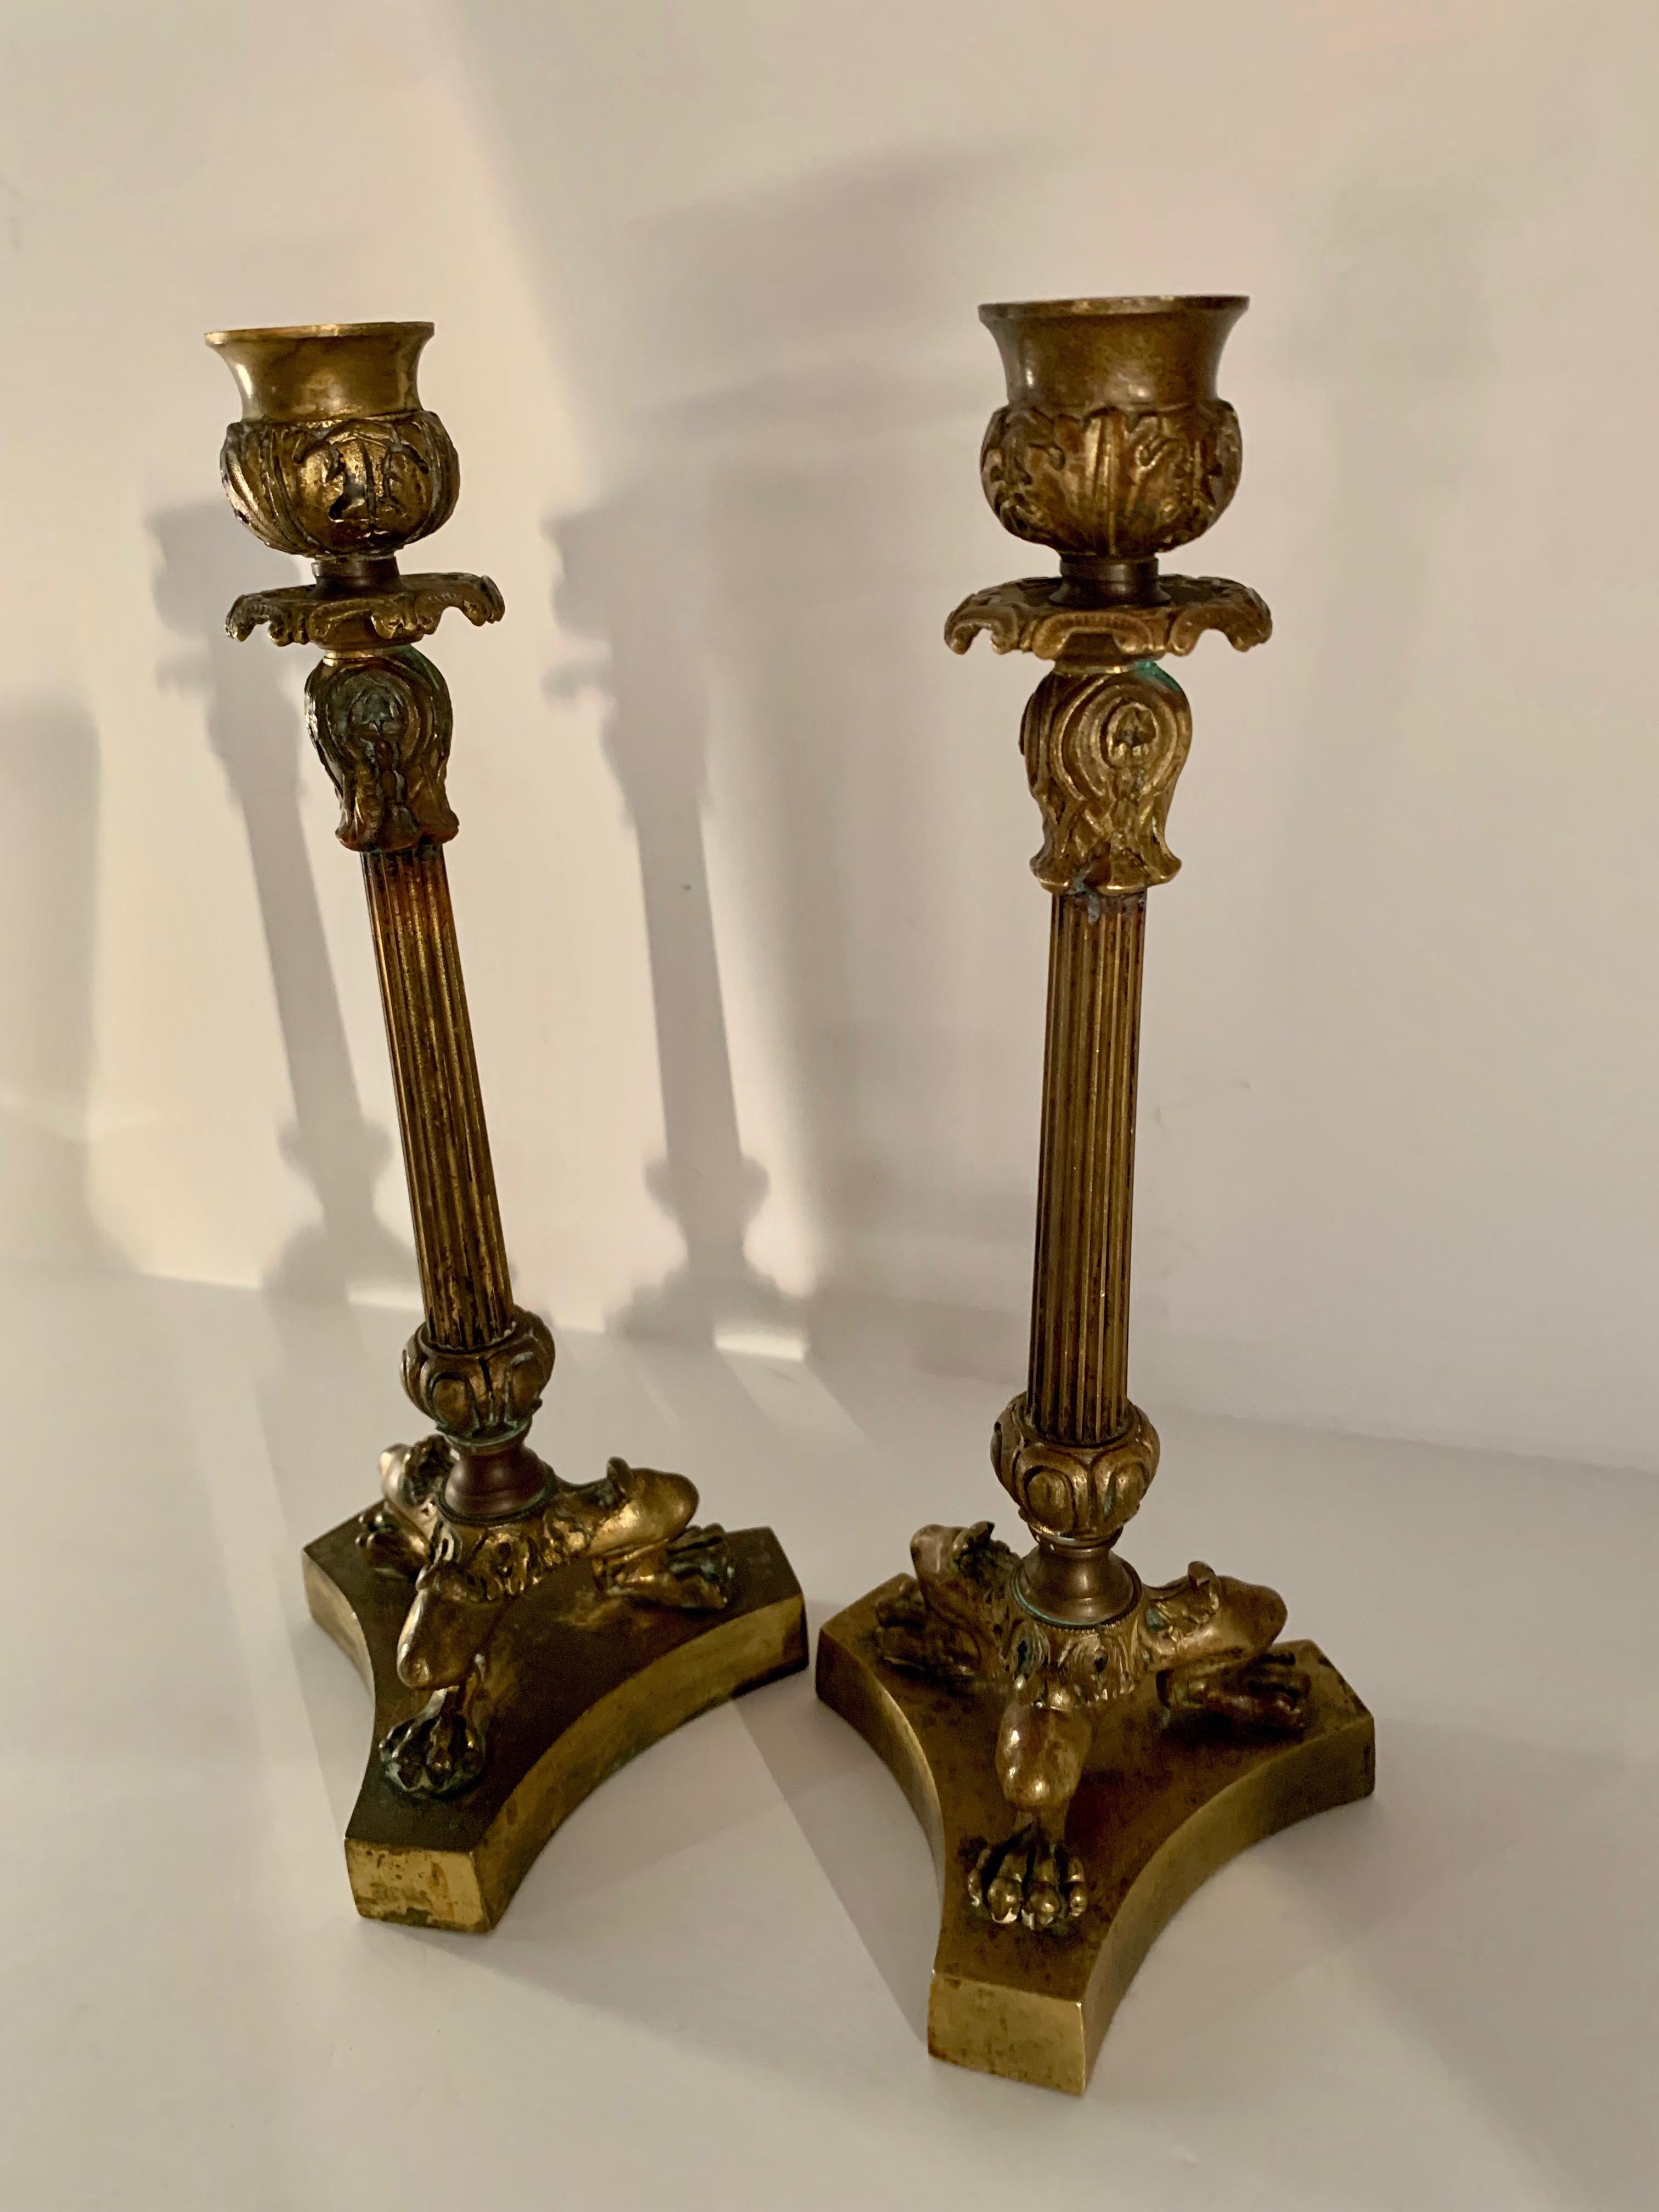 A handsome pair of 19th century French Empire candlesticks, an urn atop a column supported by lions paw feet... lovely on a dinner table, in the den or start something steamy in your bedroom with candle light! (I won't tell).